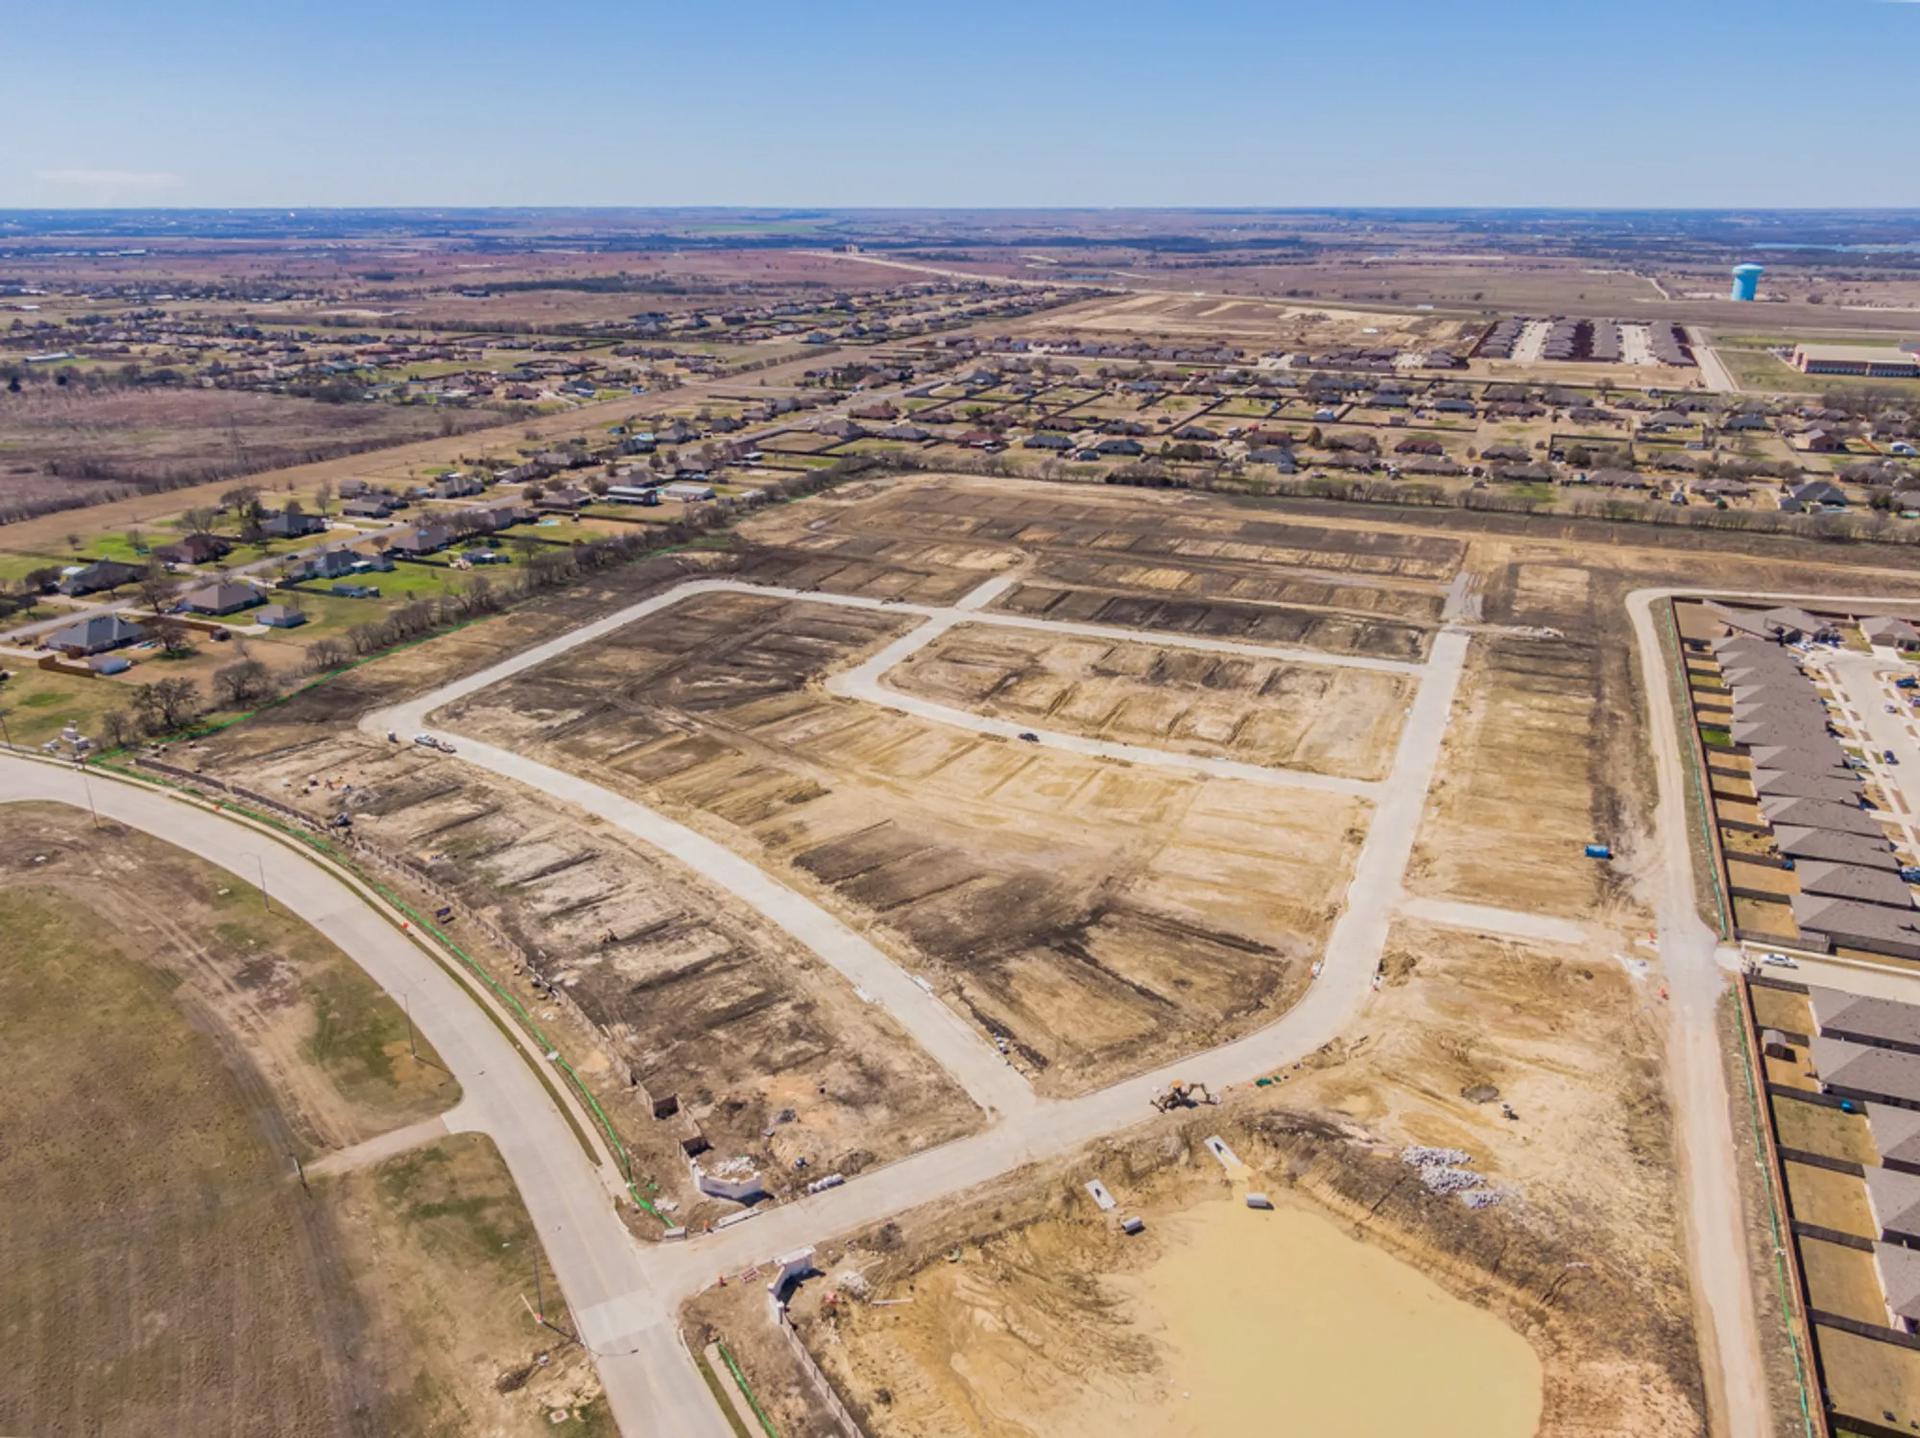 New Homes in Fort Worth, TX